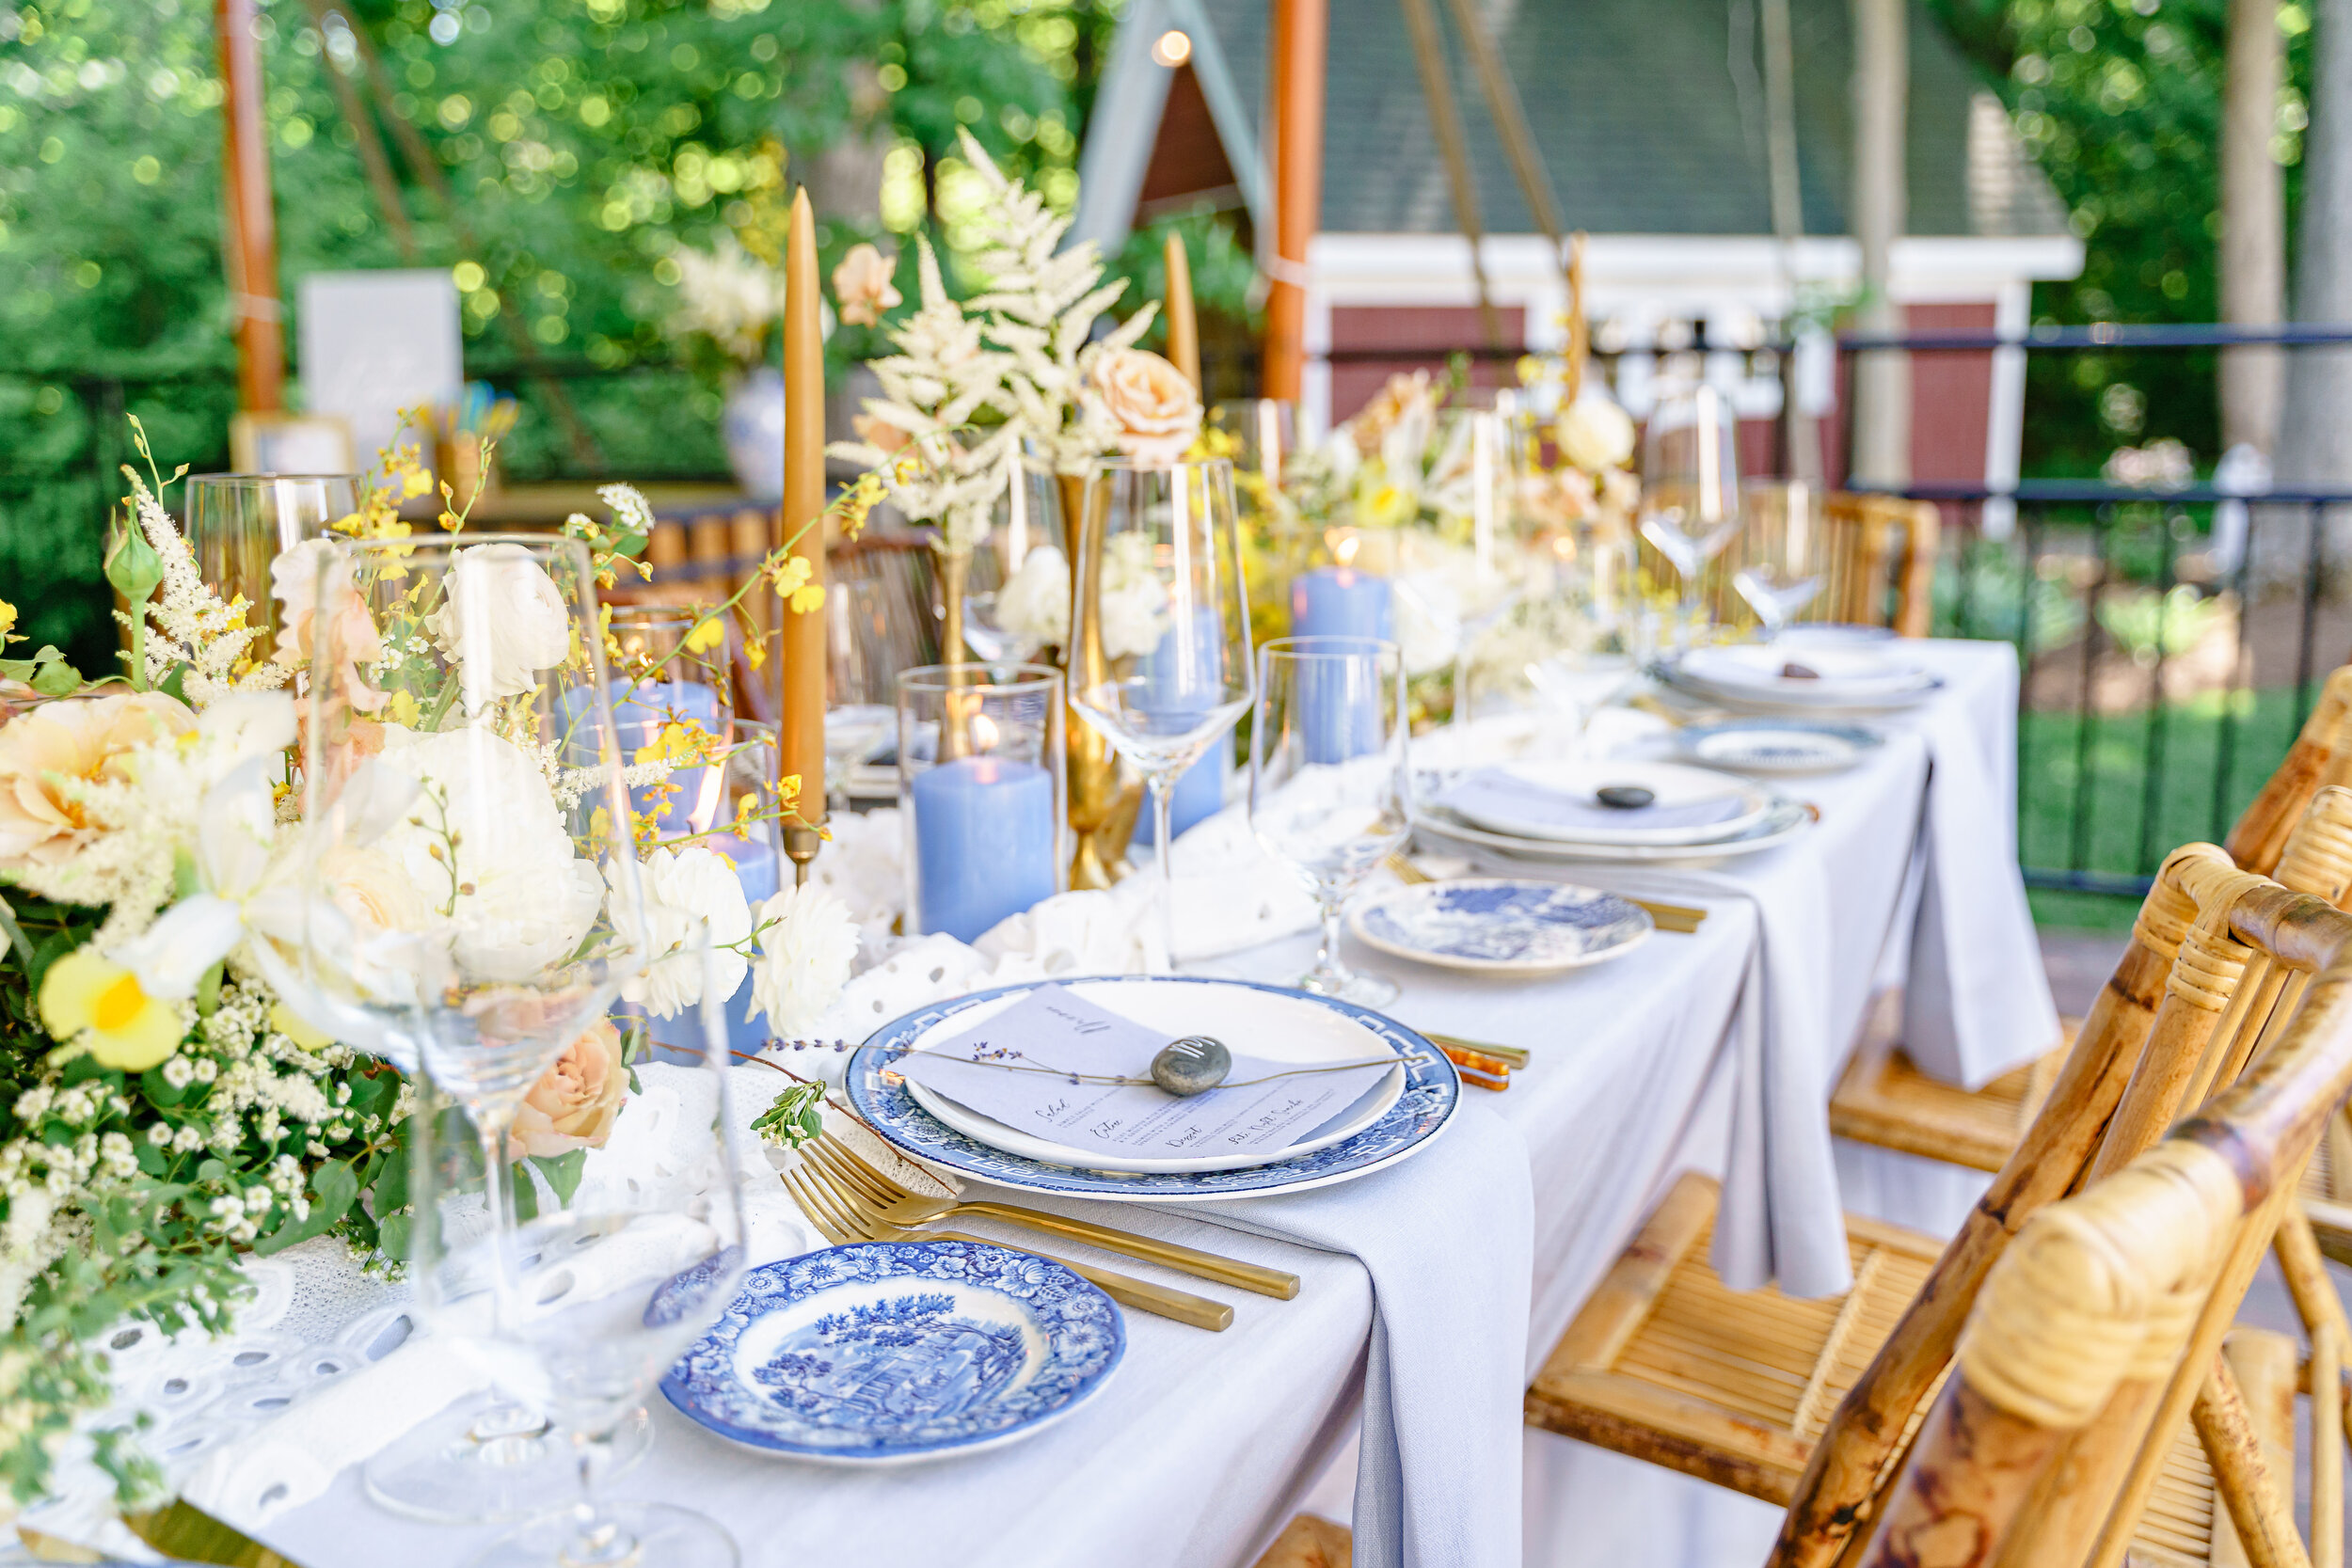 Classic and Timeless Tablescape design for midwest summer wedding reception